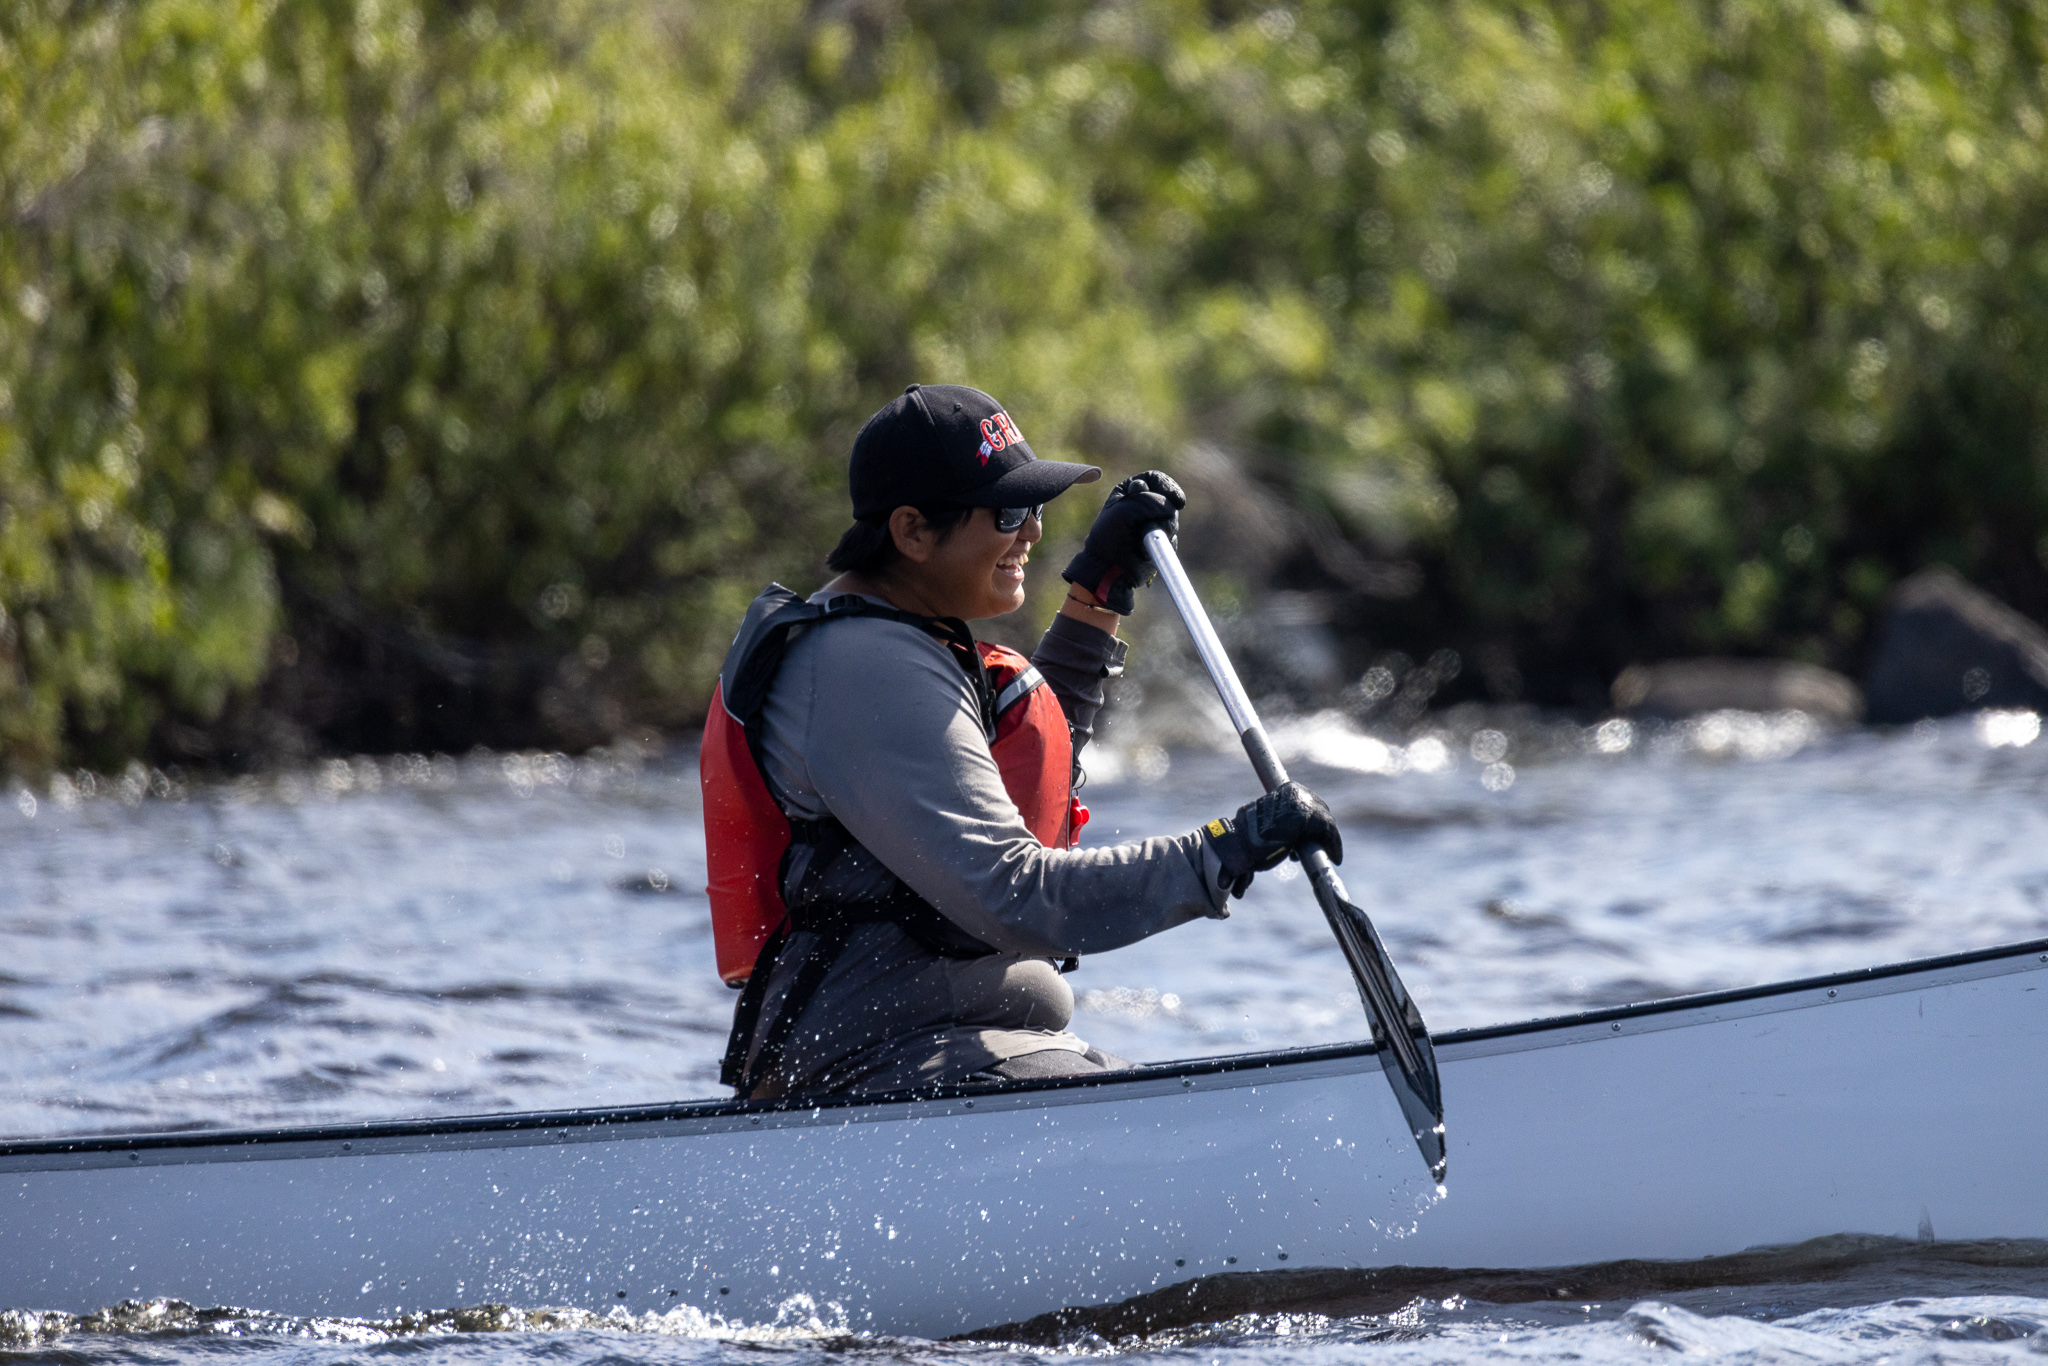 Martina Denechezhe smiles as she paddles a grey canoe wearing a black cap and red life vest